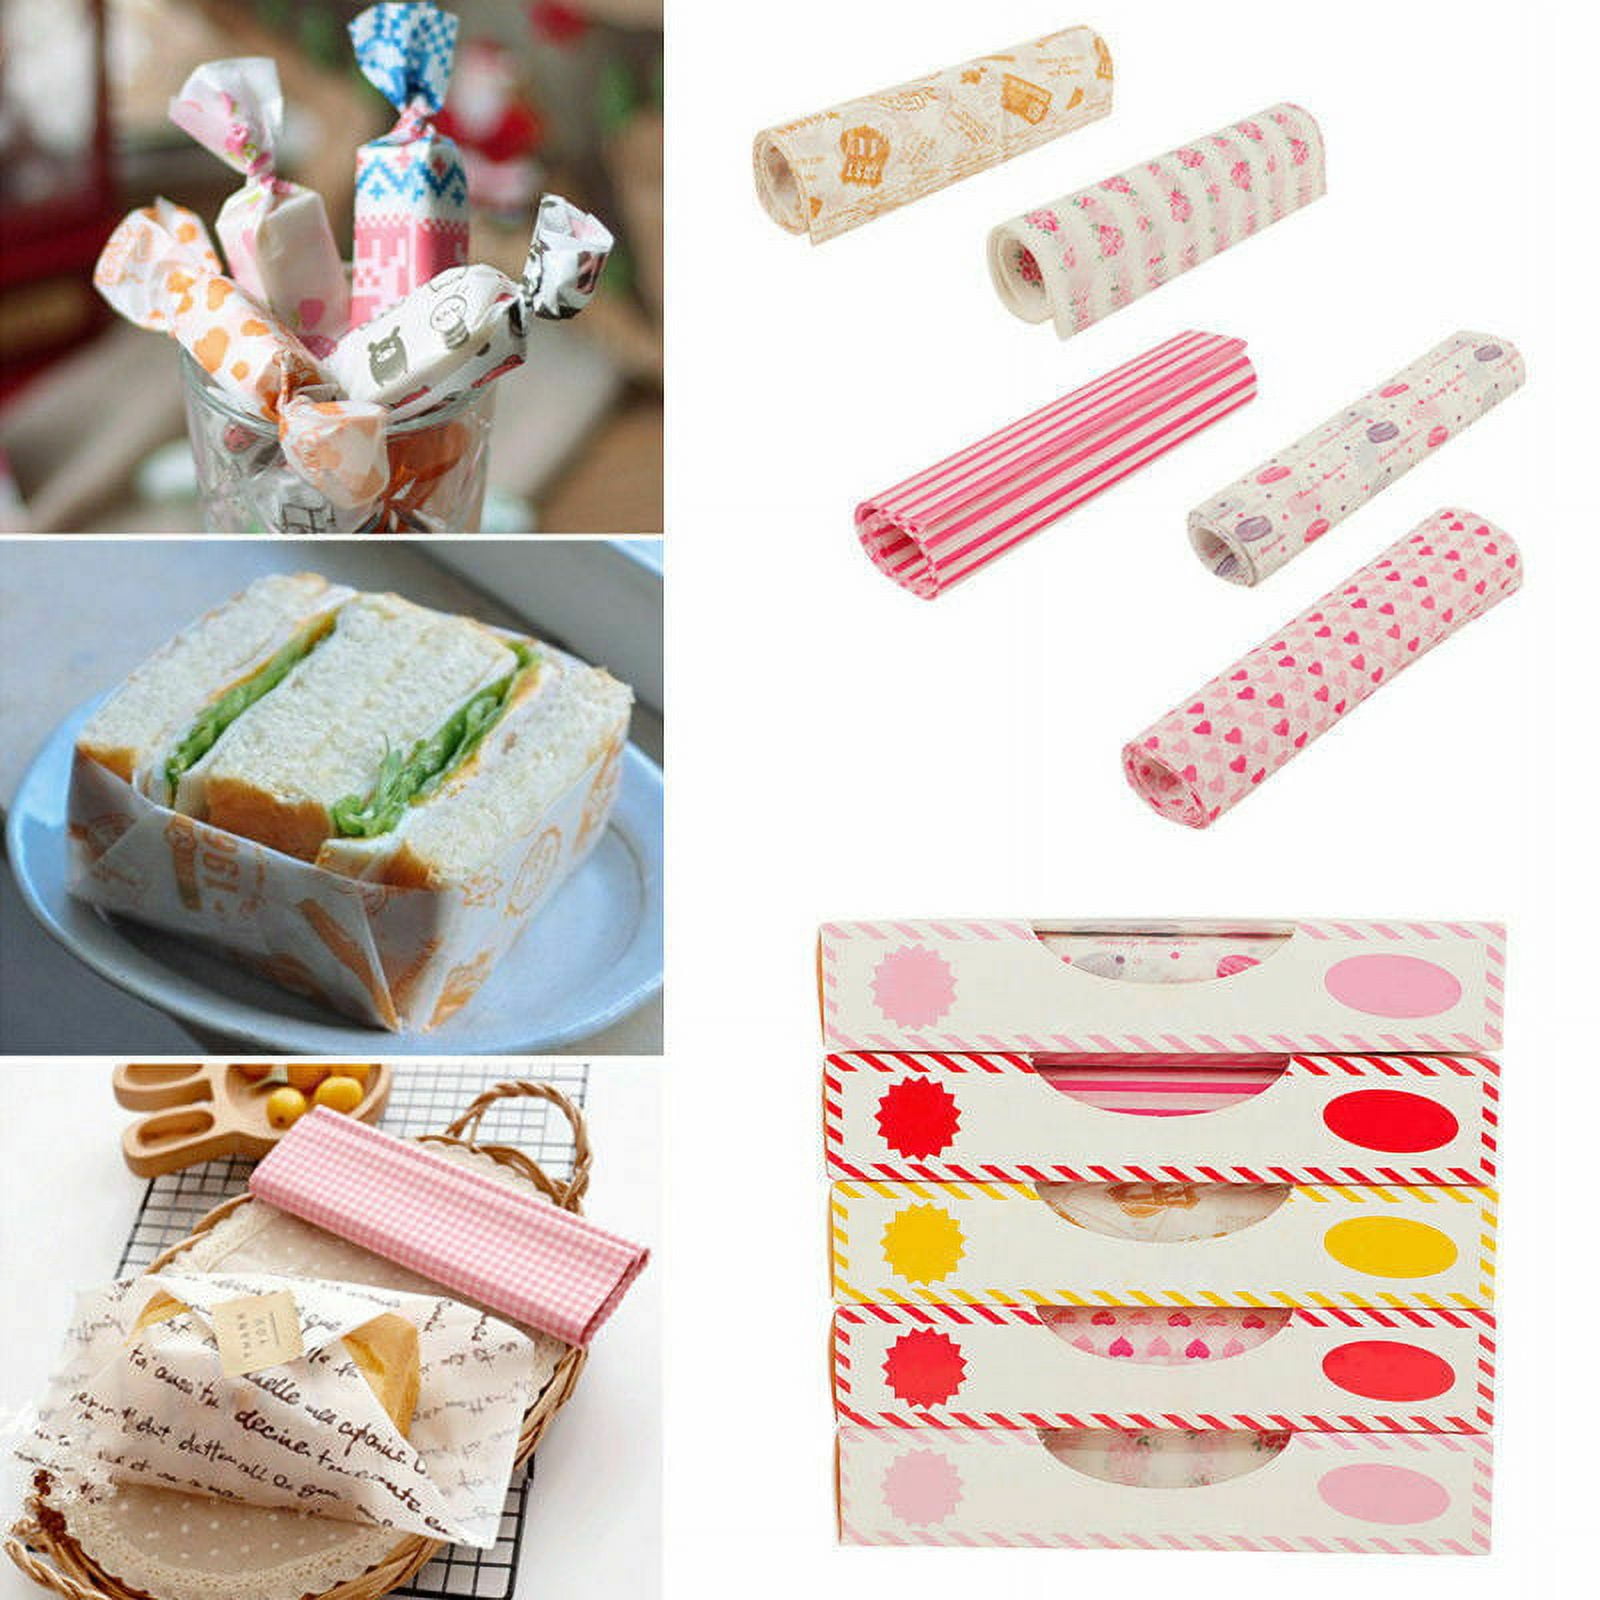 sorkwo 150 Pcs Wax Paper Sheets Valentine's Day Sandwich Wrap Paper  Wrapping Tissue Food Picnic Paper for Food Basket Liner